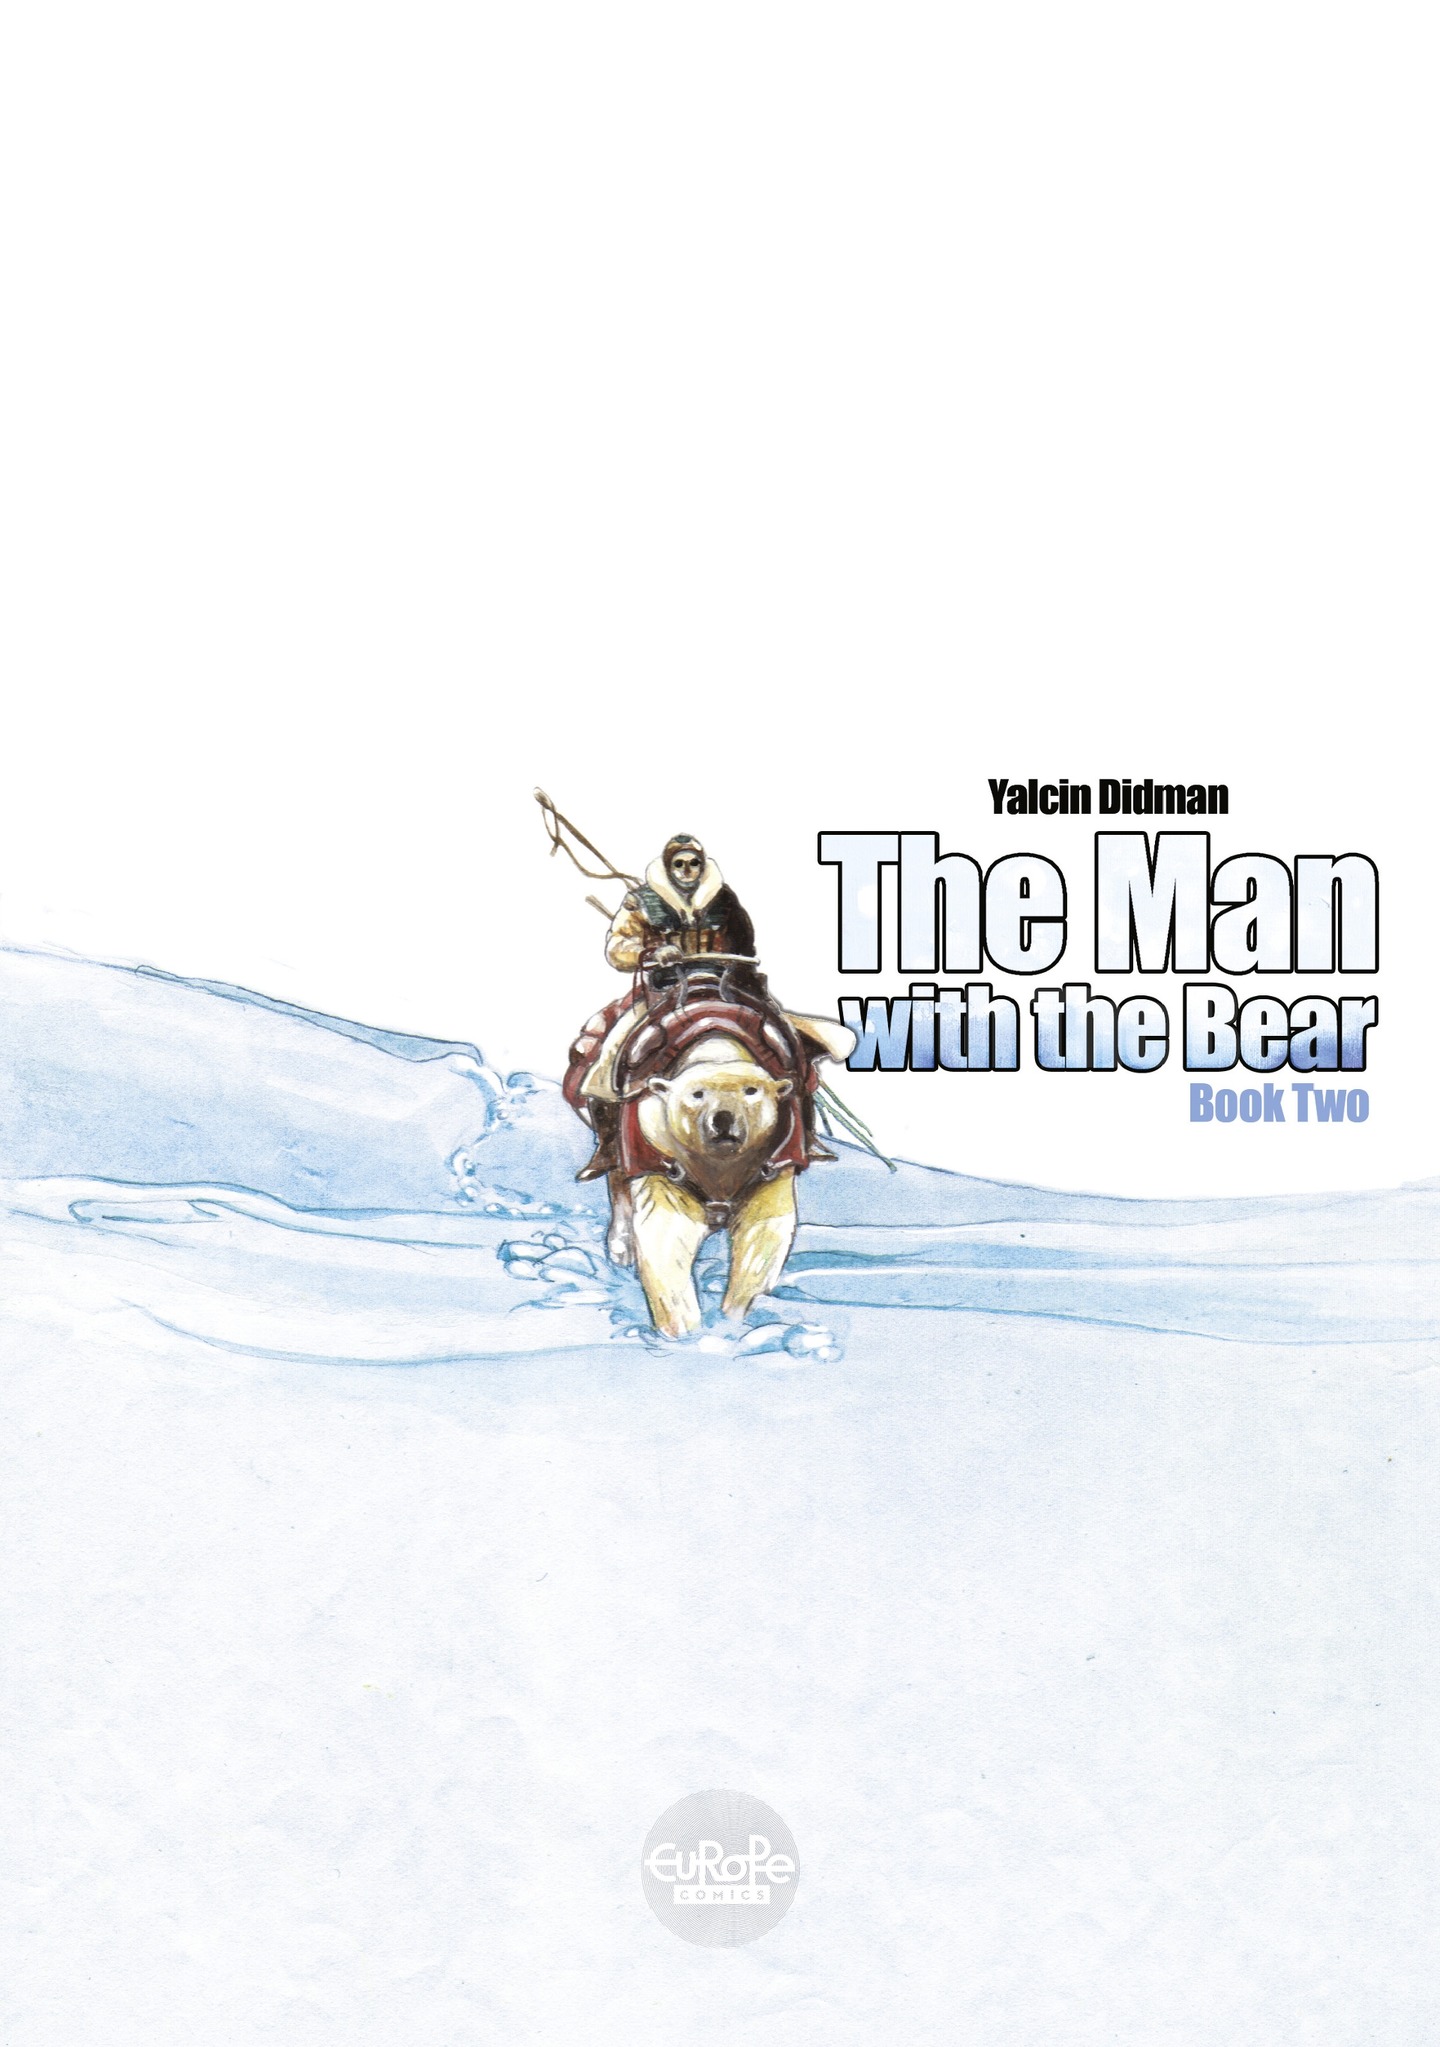 Read online The Man With the Bear comic -  Issue #2 - 2